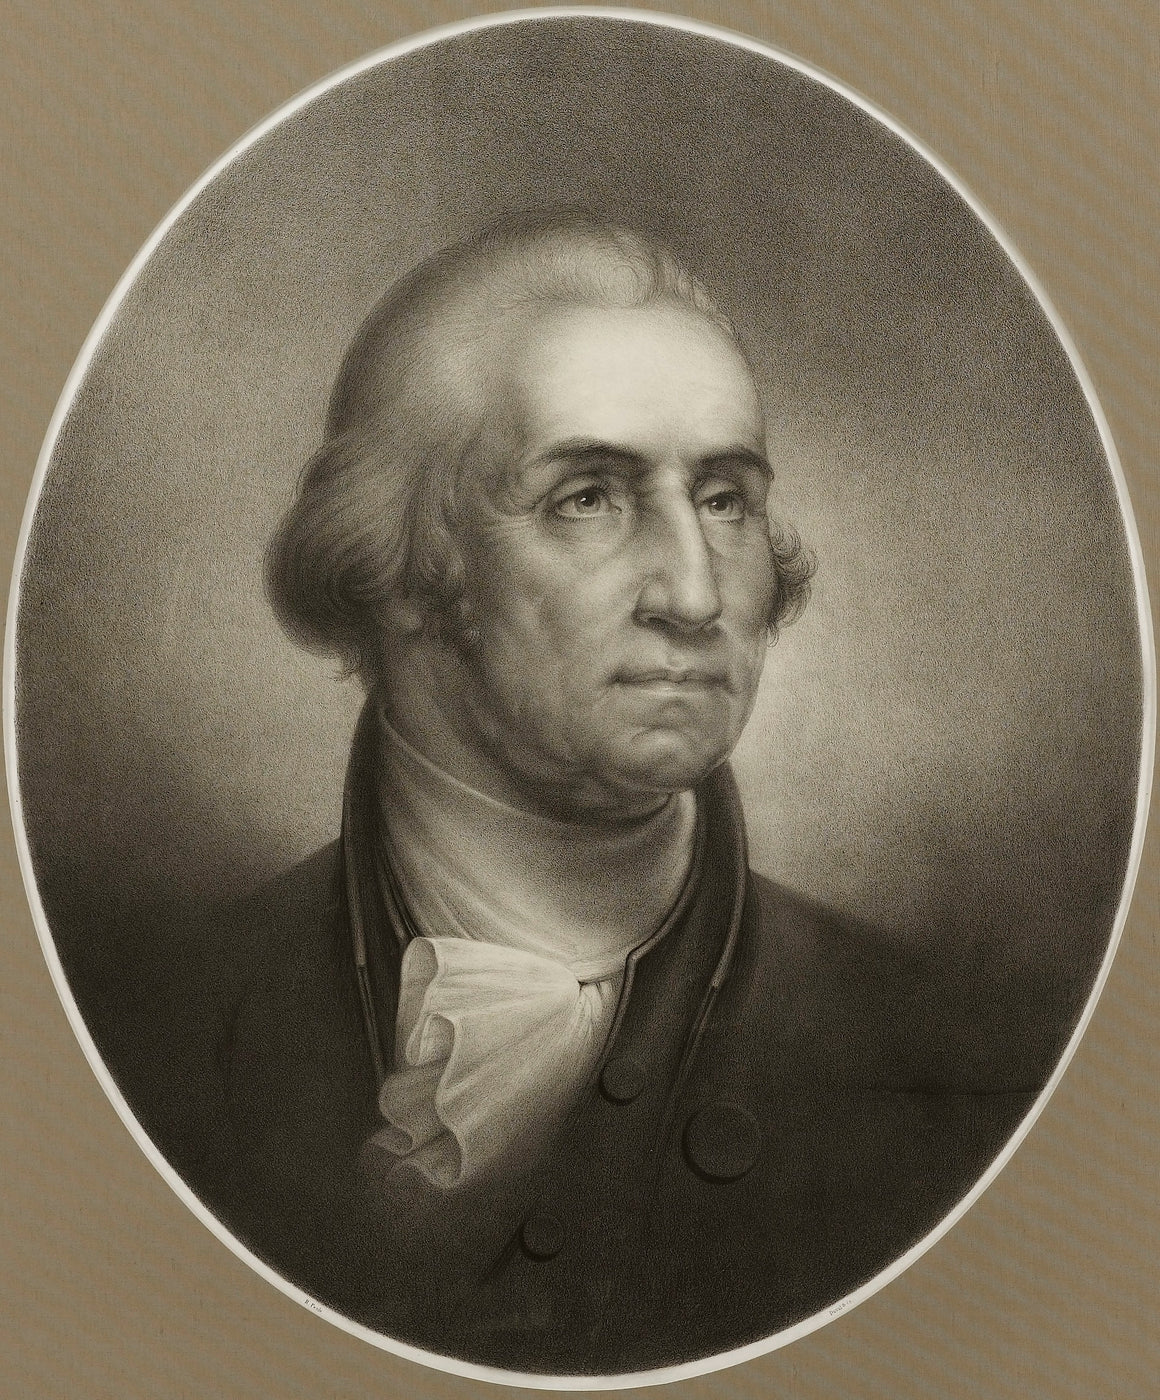 "George Washington" Lithograph, Published by Peter S. Duval, After Rembrandt Peale, 1856